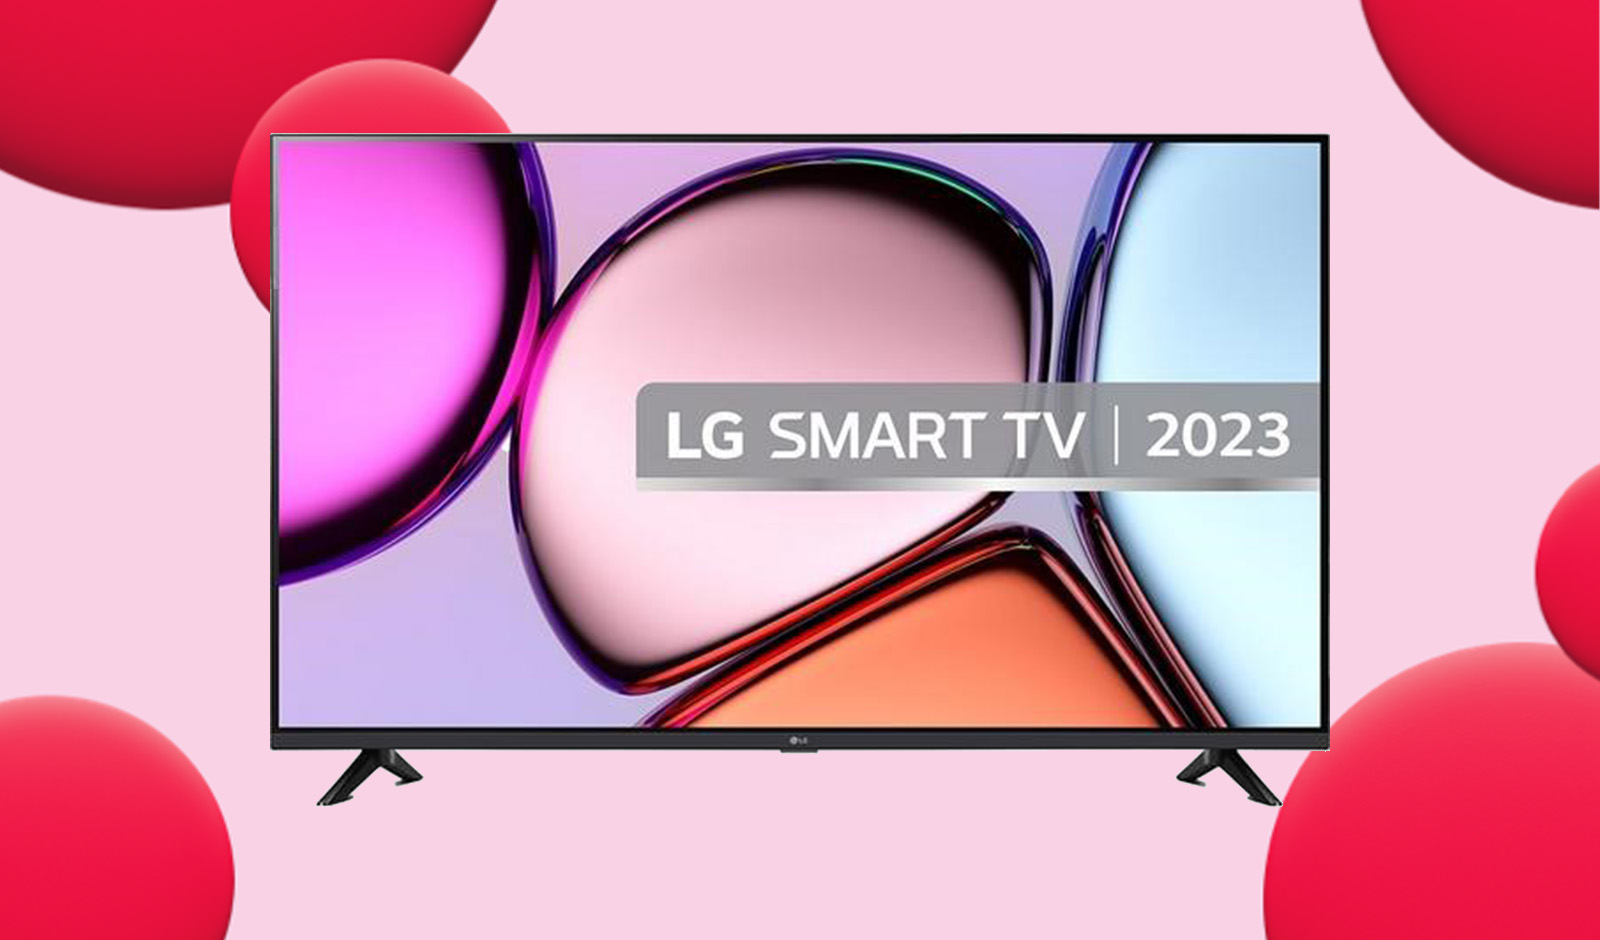 Save £49 on the LG 43" Smart LED TV, now just £199.99!